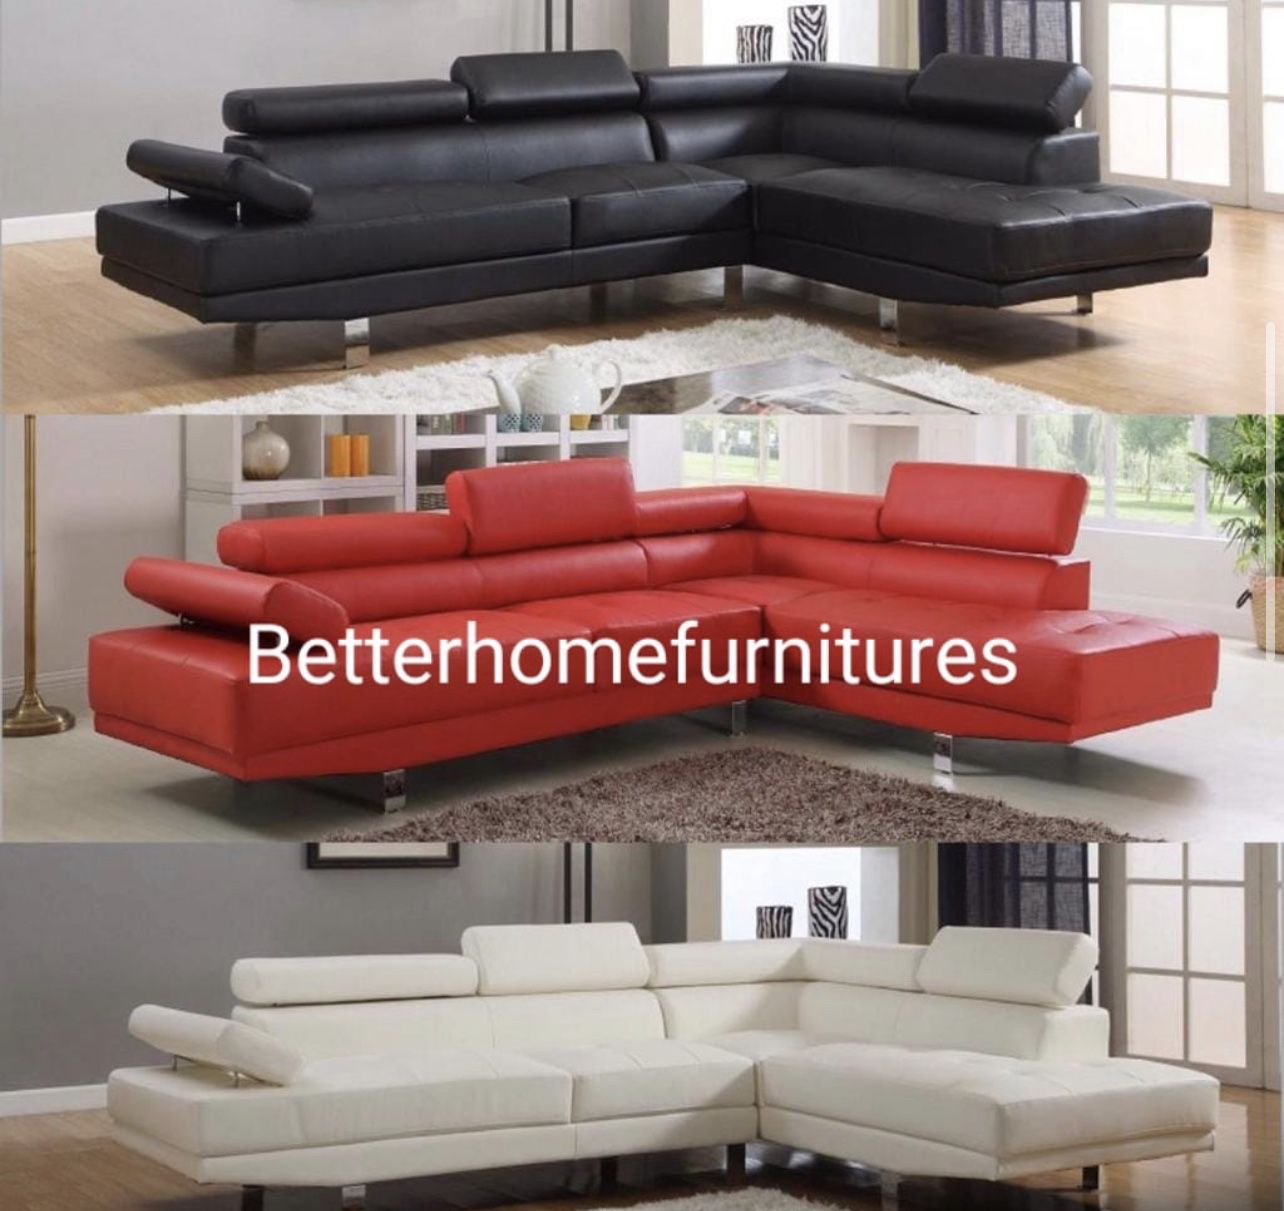 Brand new sectionals sofas in box- Flexible Payment options available $39 down. LOWEST PRICES(Message for details) 